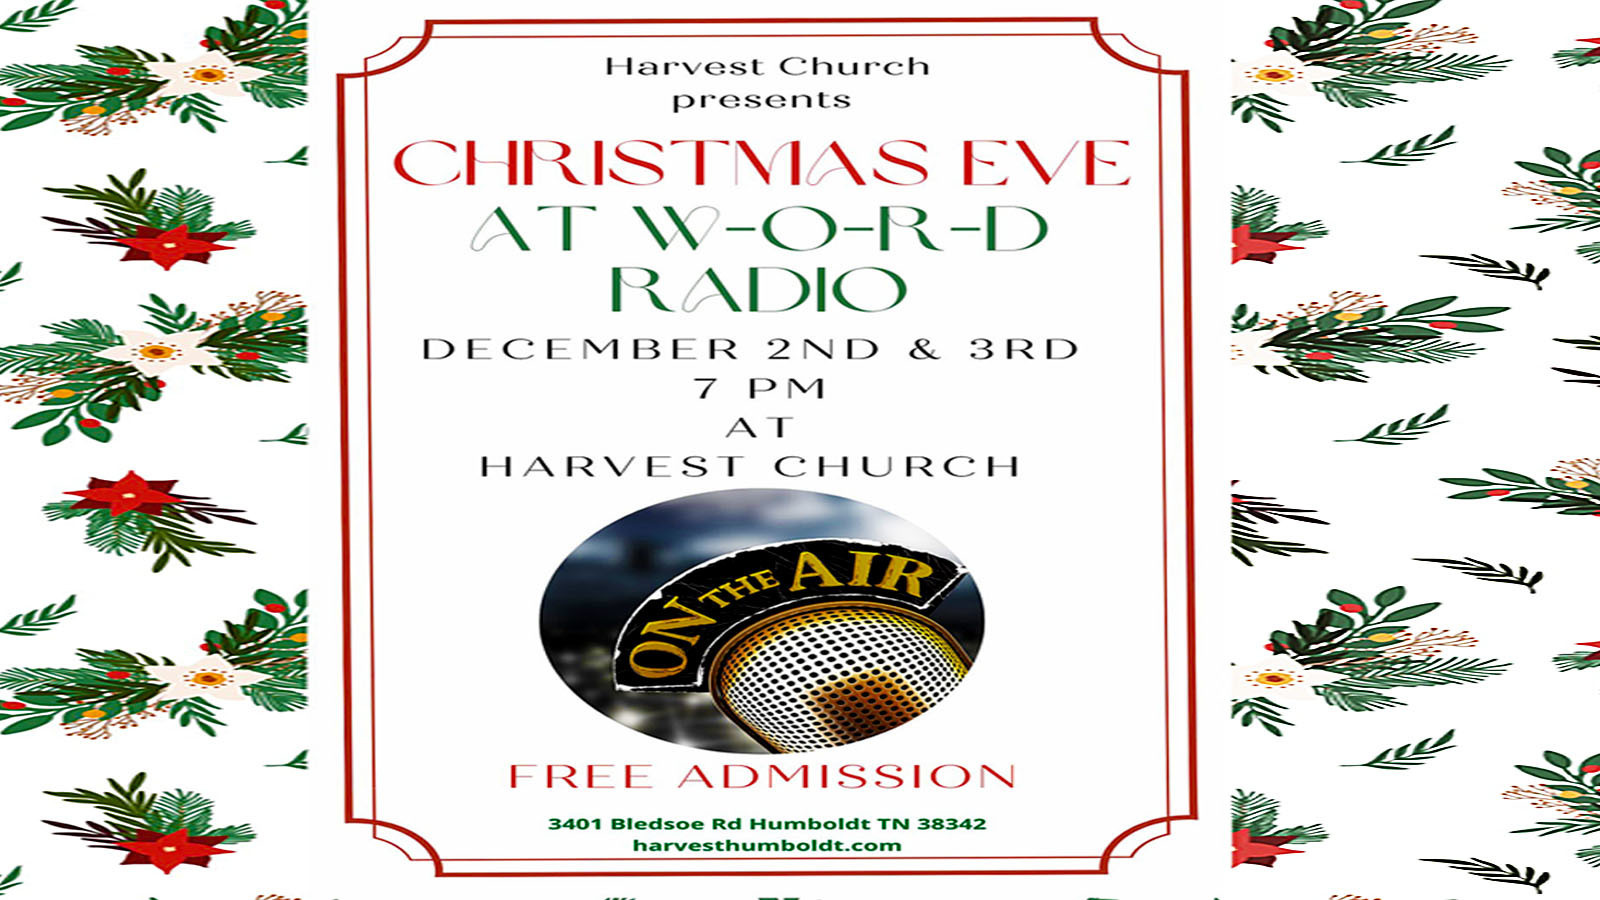 Christmas Eve at W-O-R-D Radio, Humboldt, Tennessee, United States